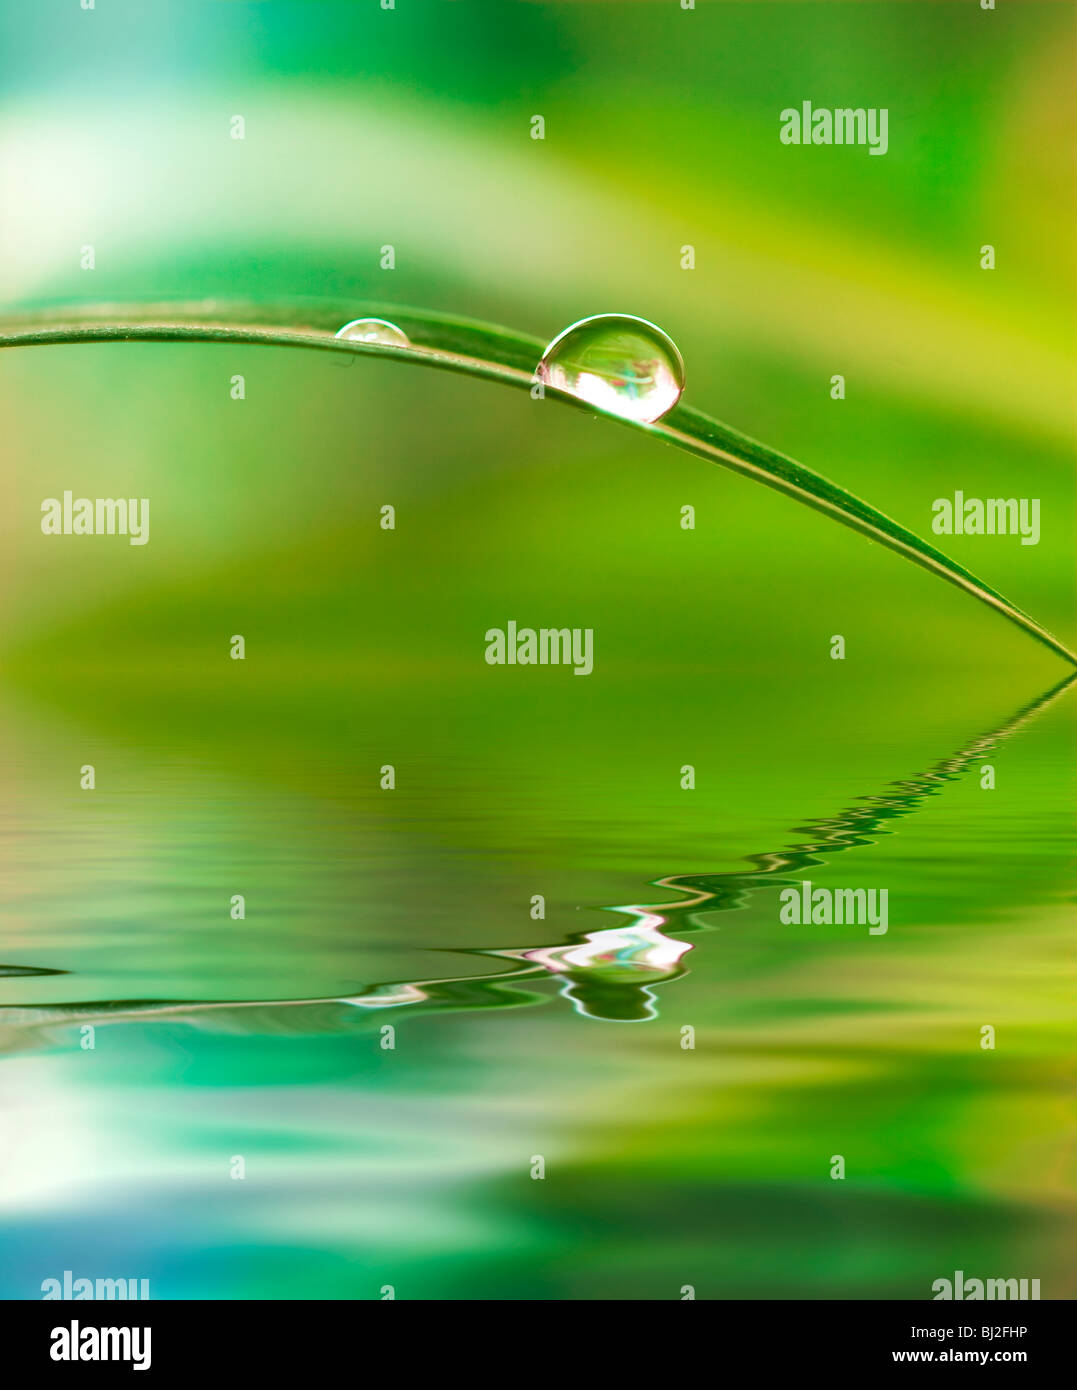 A water drop from a leaf causing a ripple on the surface reflecting a green jungle atmosphere Stock Photo